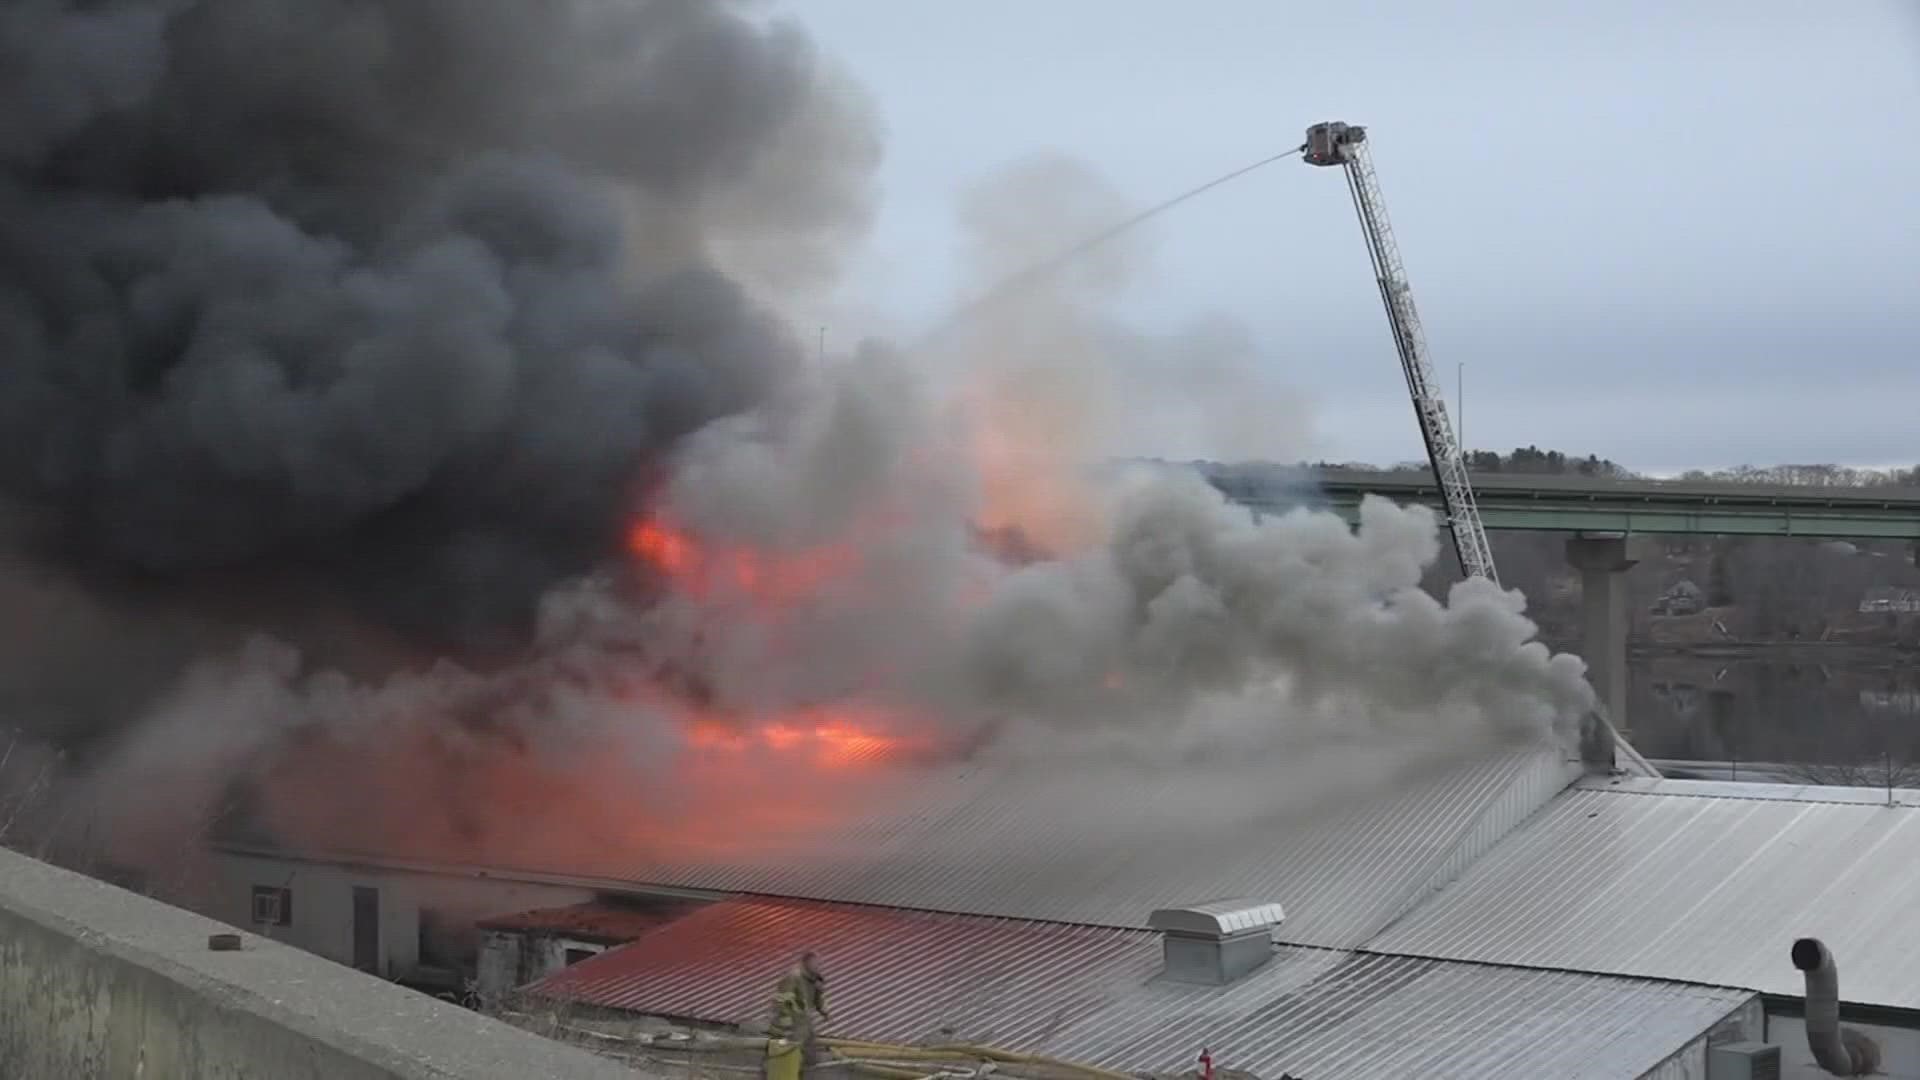 The fire that destroyed the Penobscot-McCrum potato processing facility was ruled accidental.